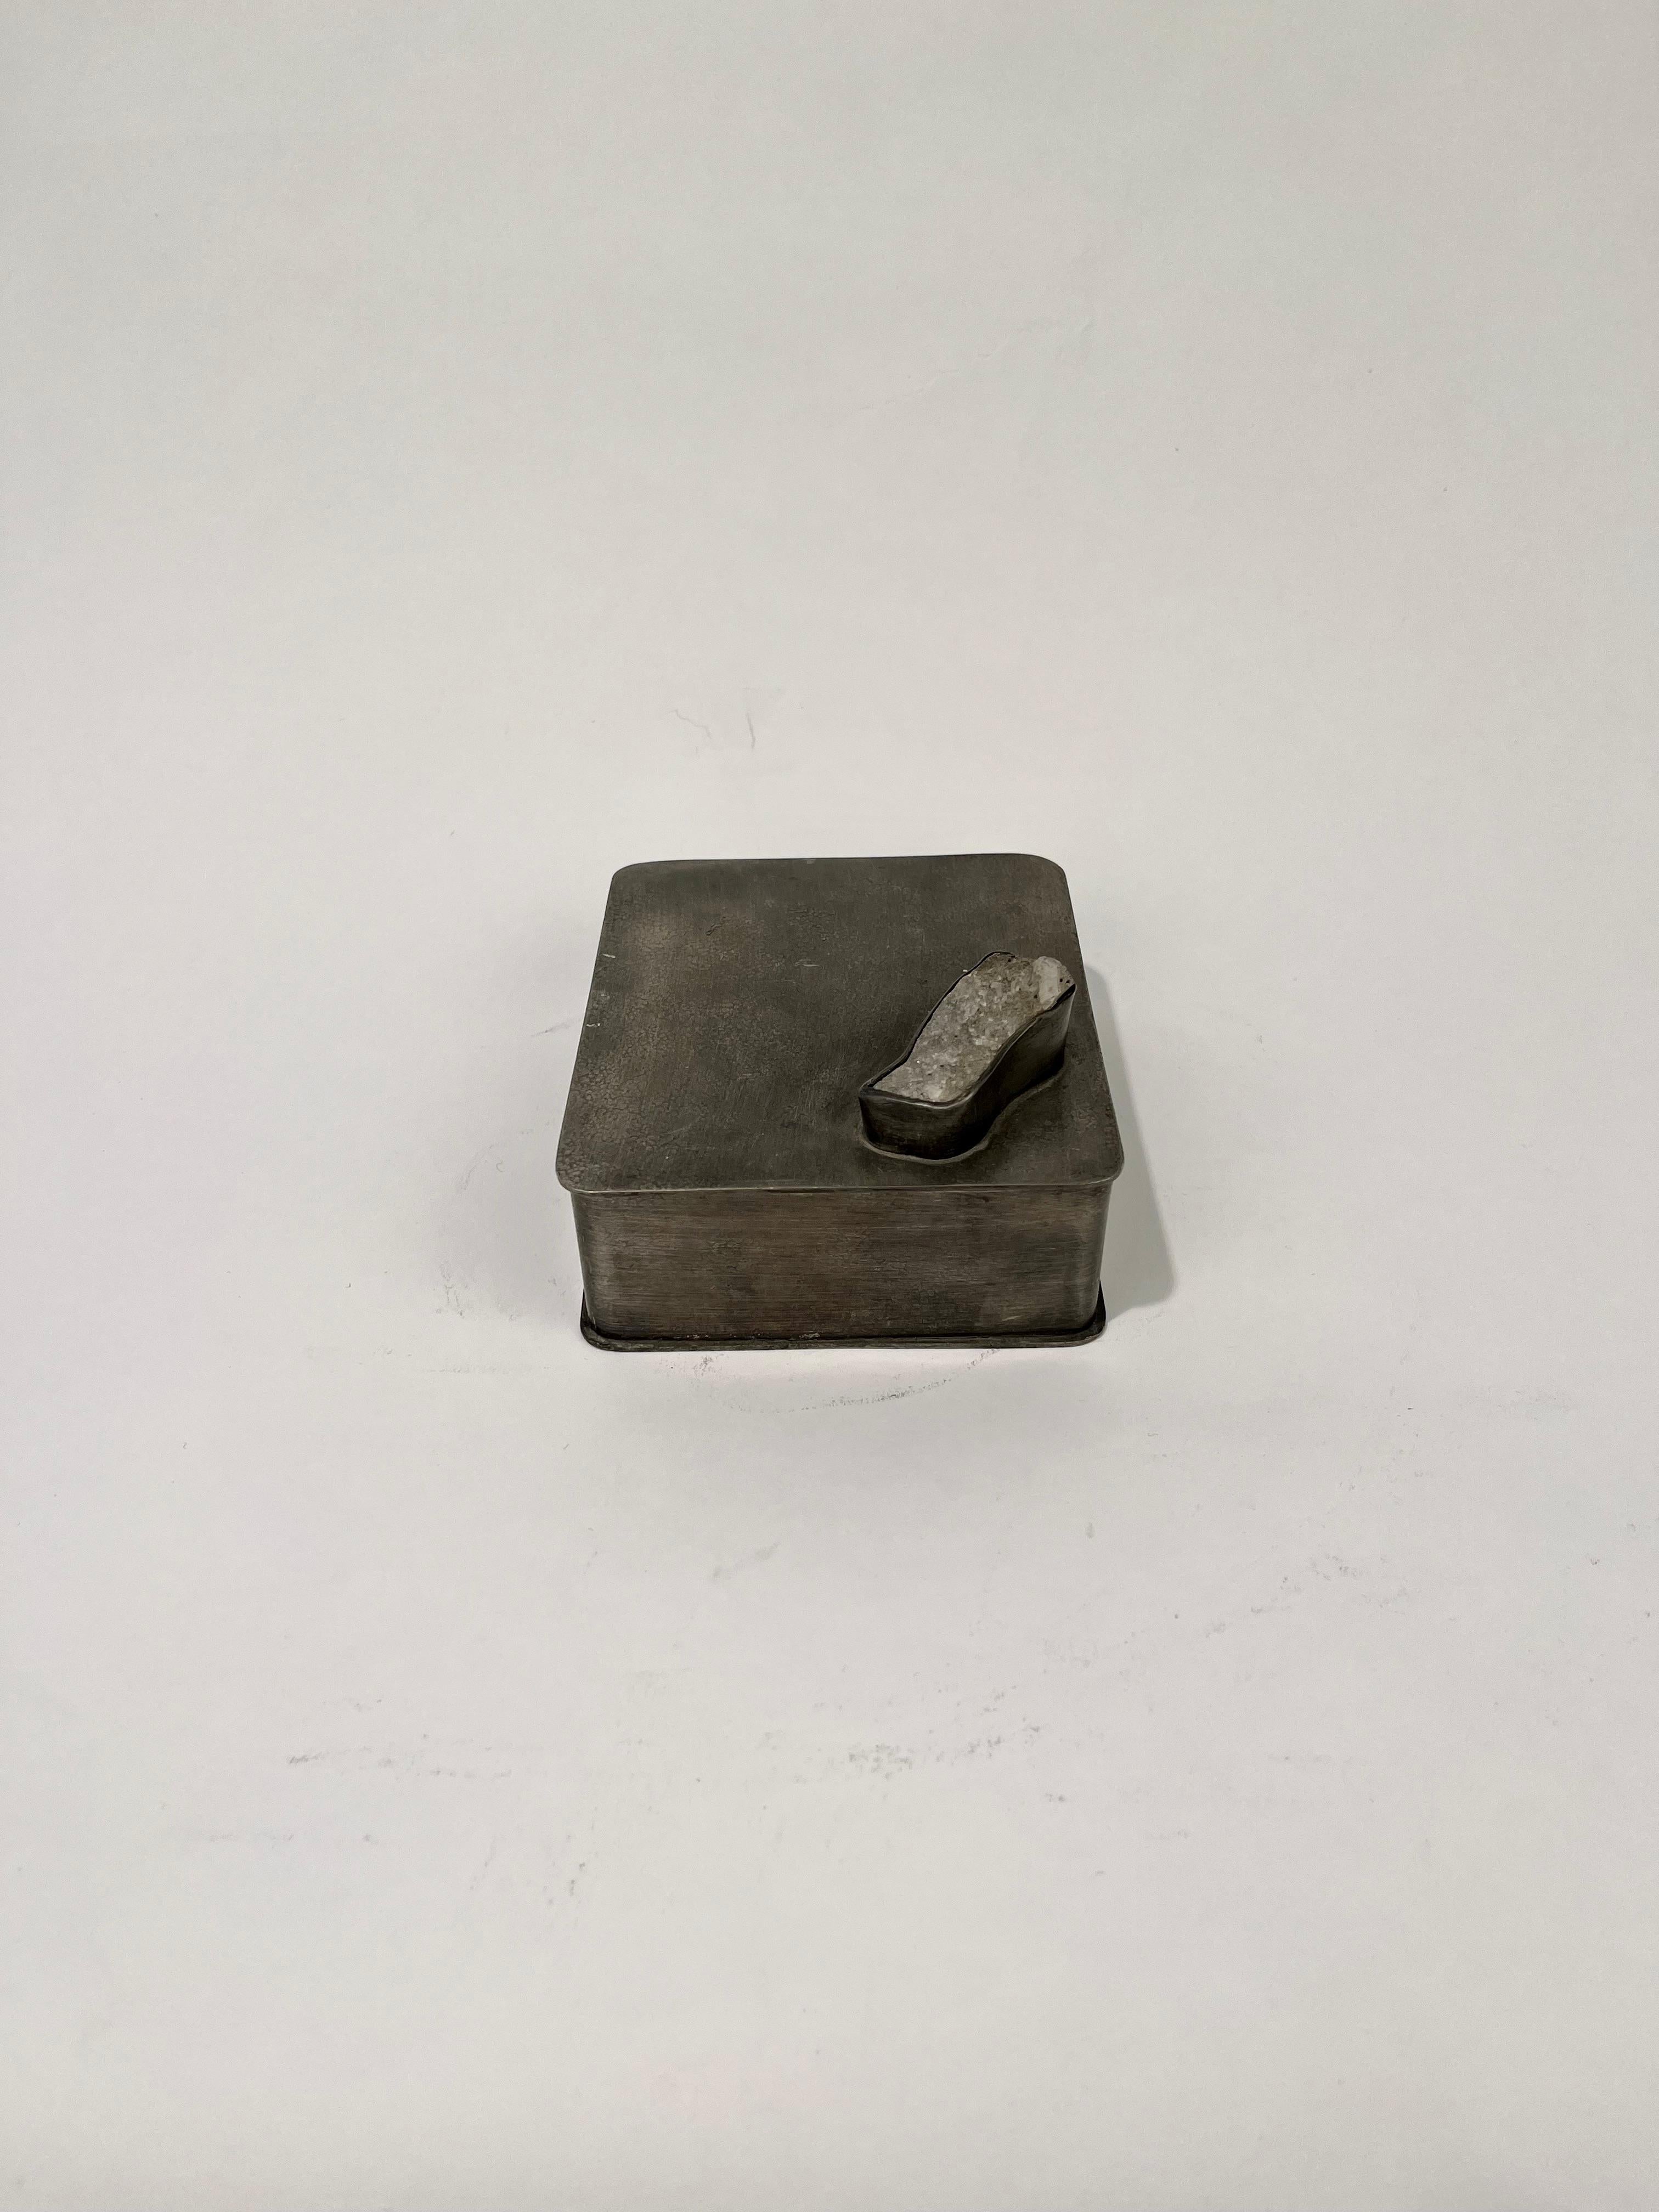 Pewter box with mountain crystal on the lid.
No known designer or manufacturer.